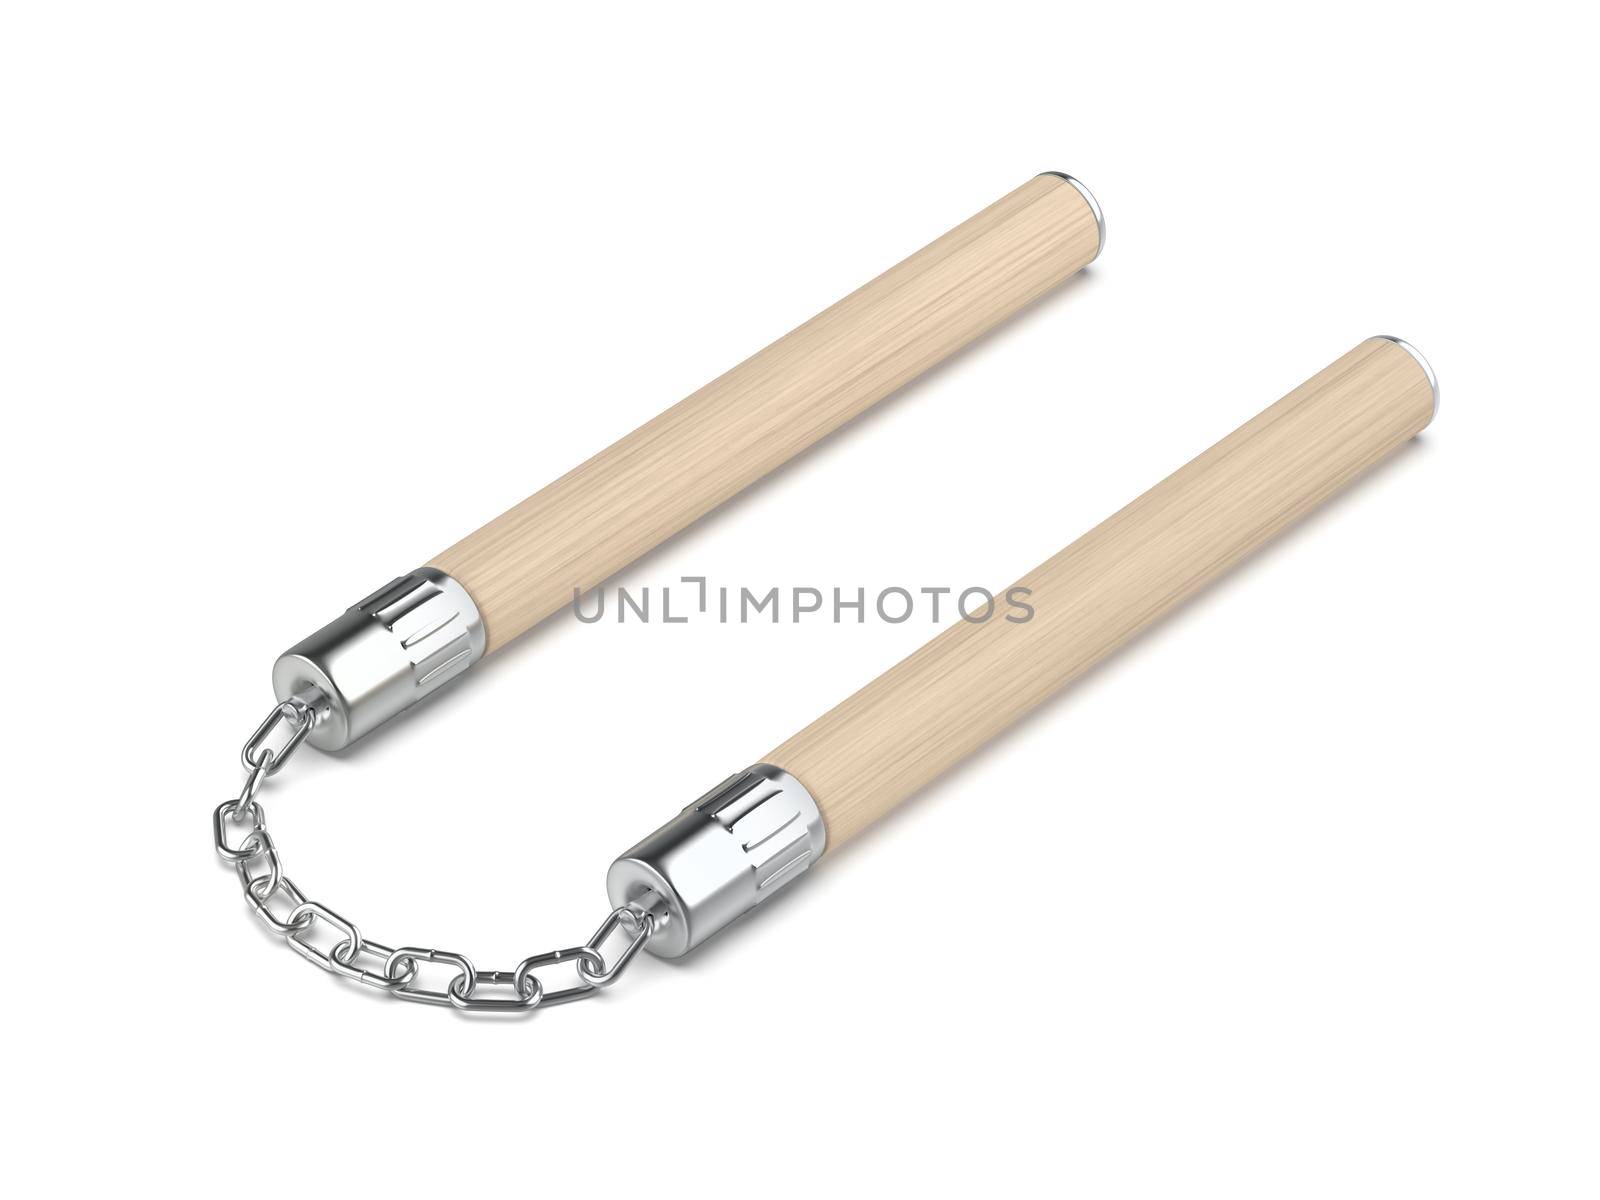 Wooden nunchaku with chain on white background